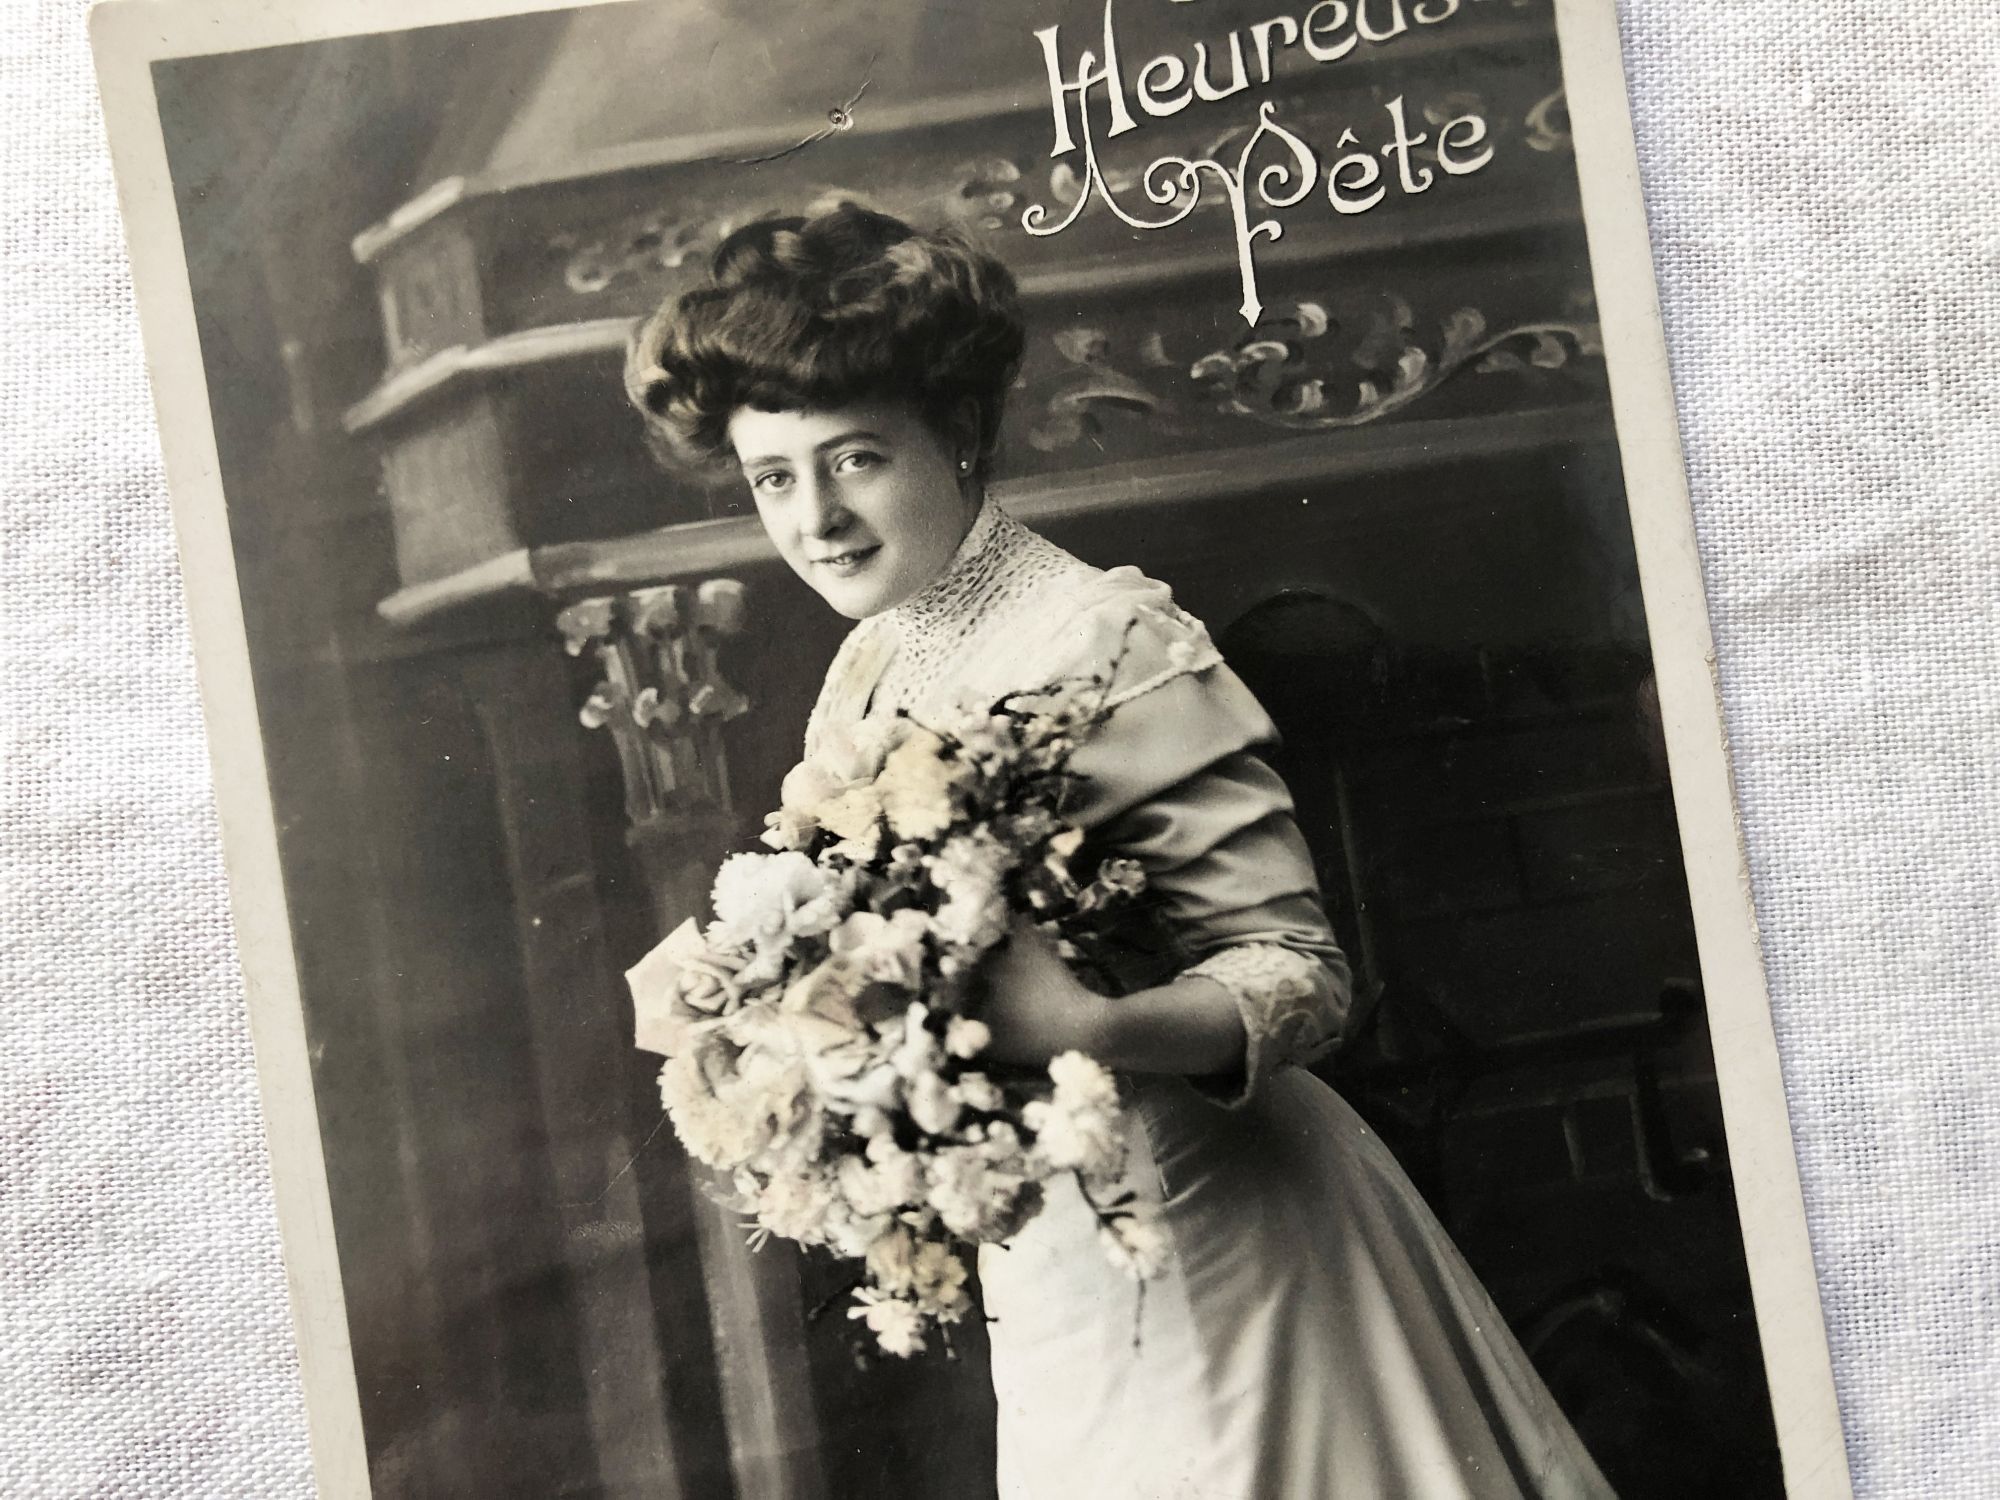 Vintage Belgian postcard representing a young woman with a bouquet of flowers